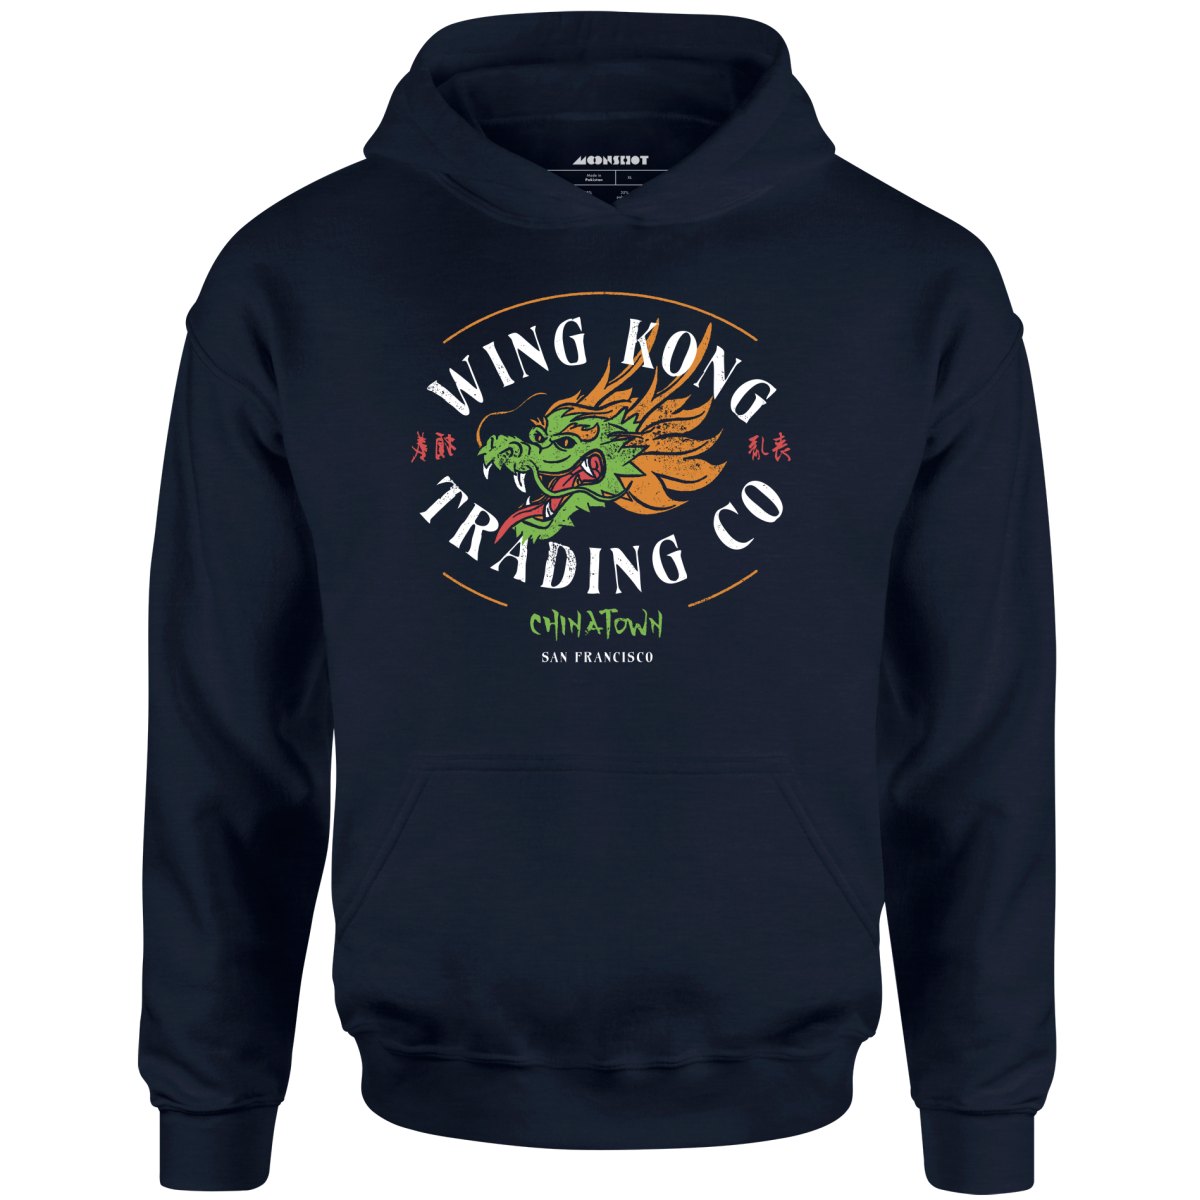 Wing Kong Trading Co. - Unisex Hoodie